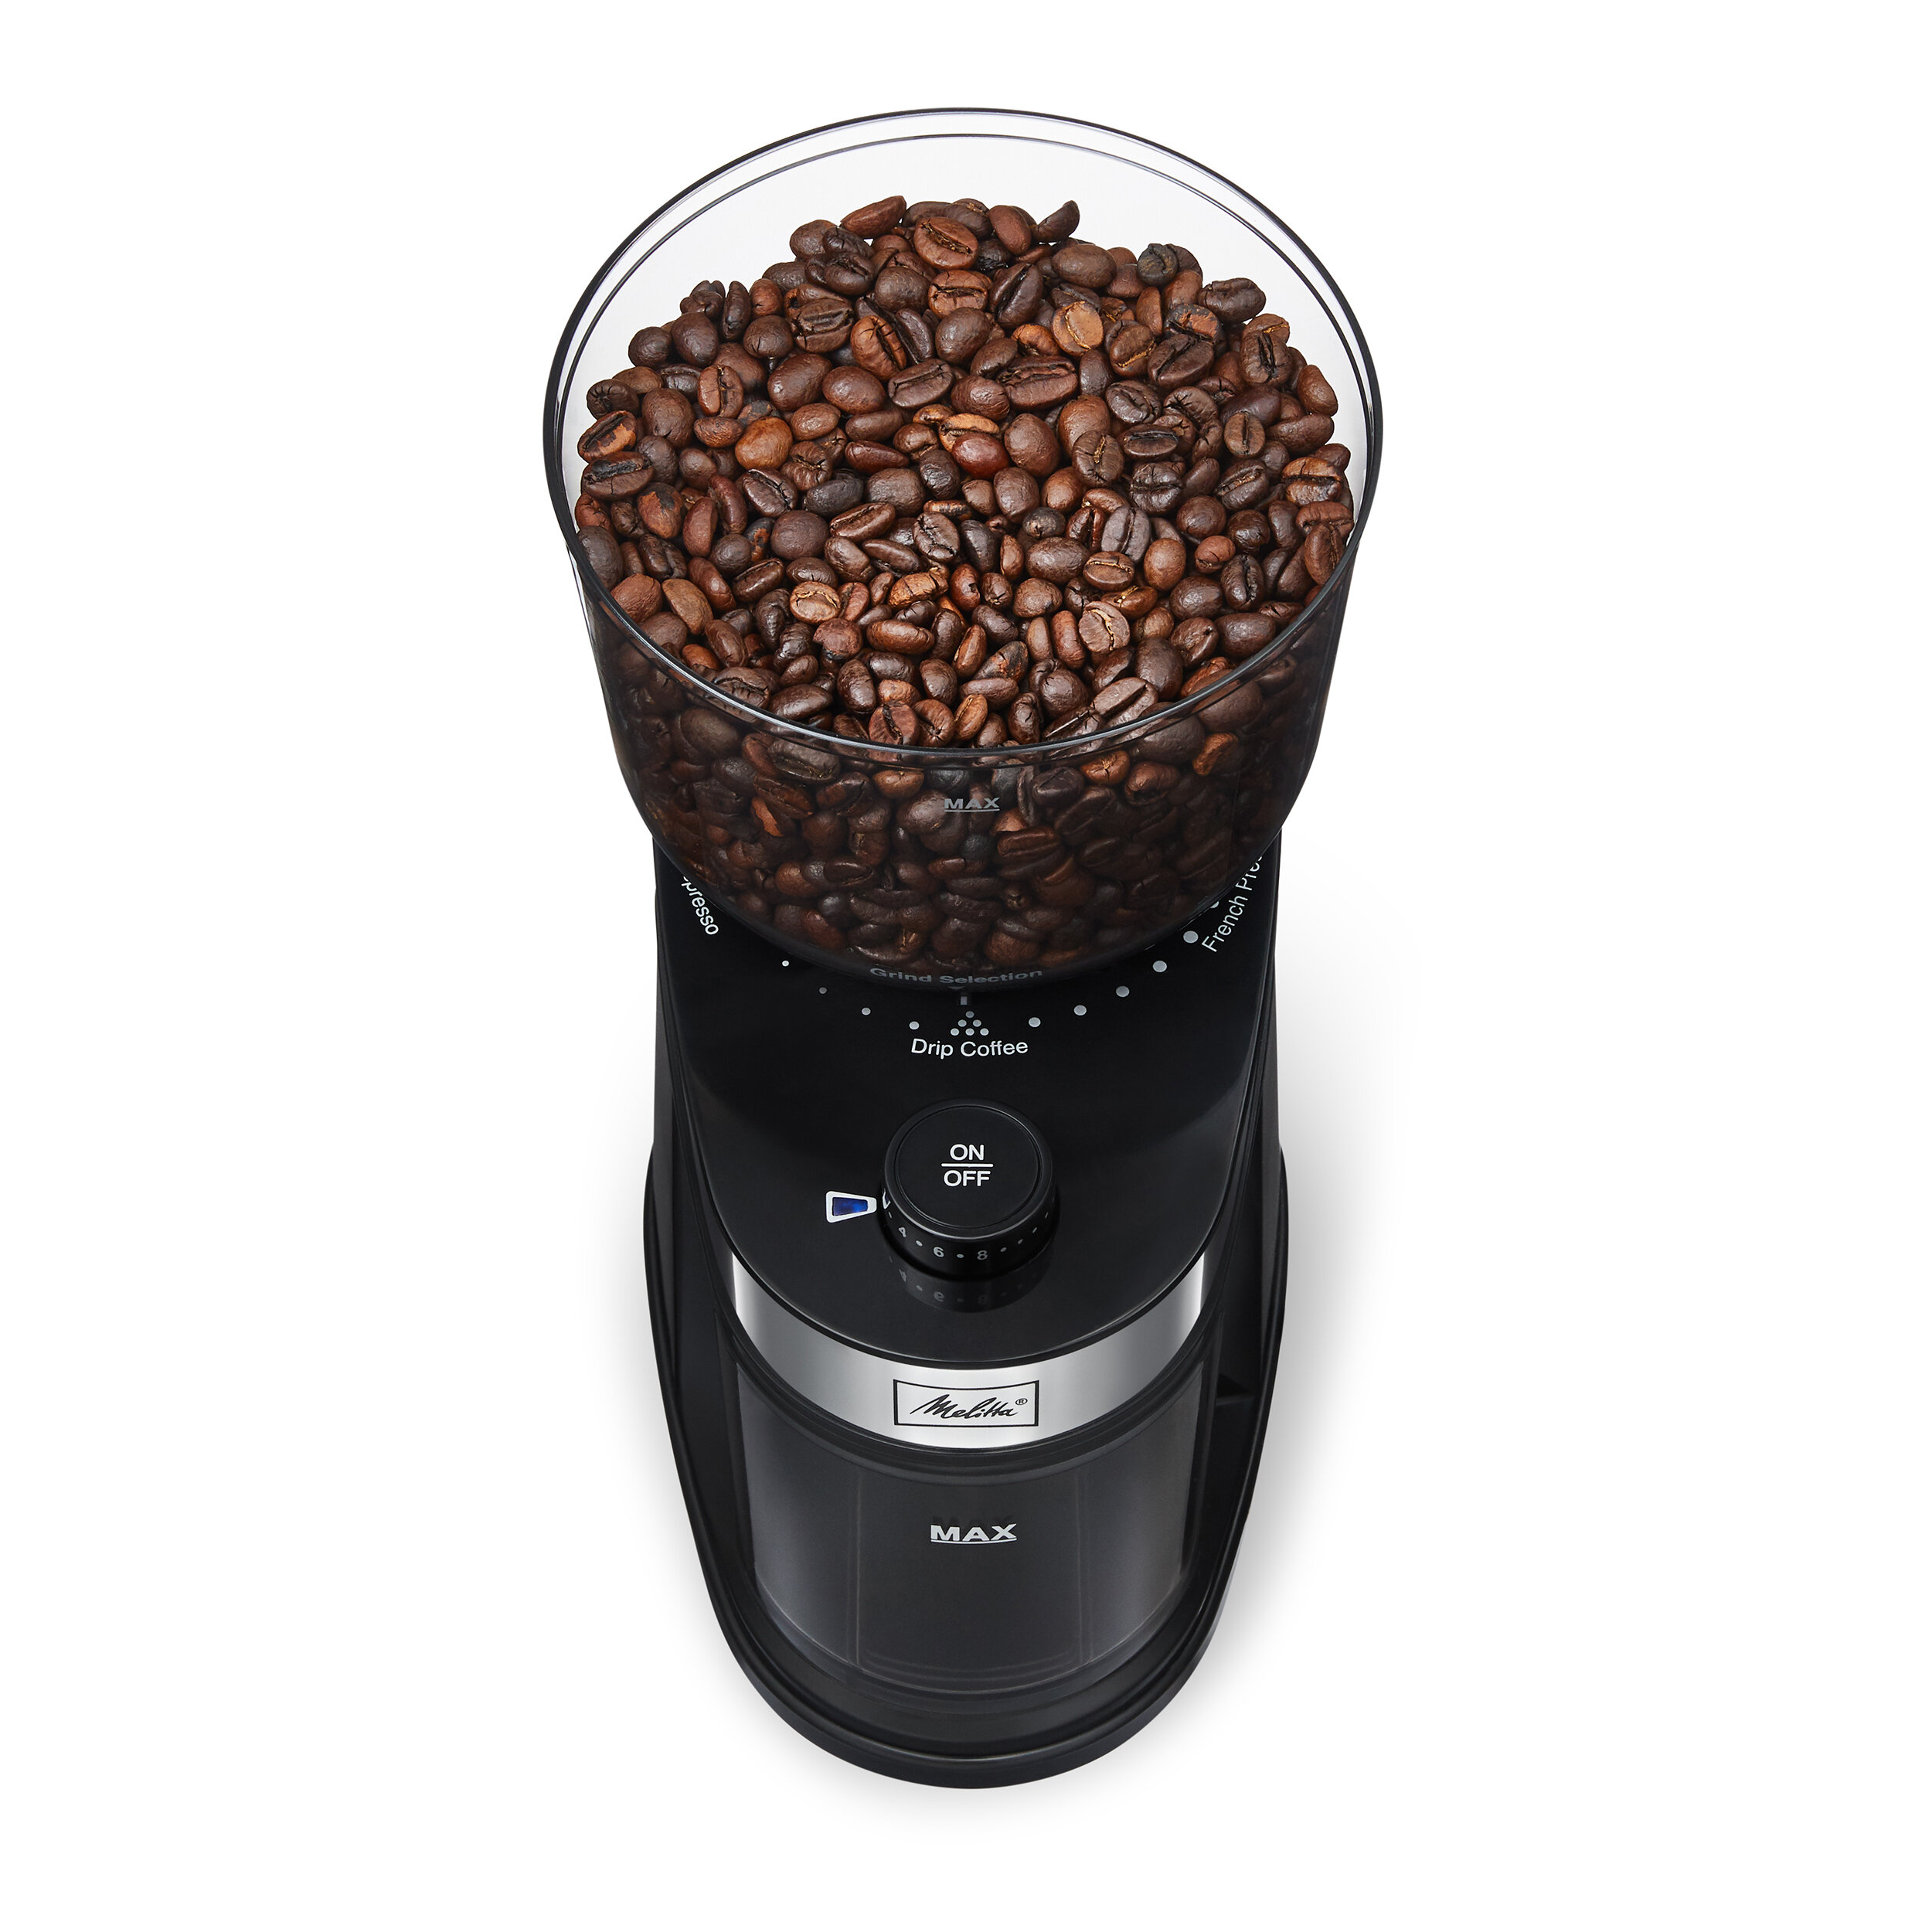 Brentwood 32-Cup Electric Automatic Burr Coffee Grinder